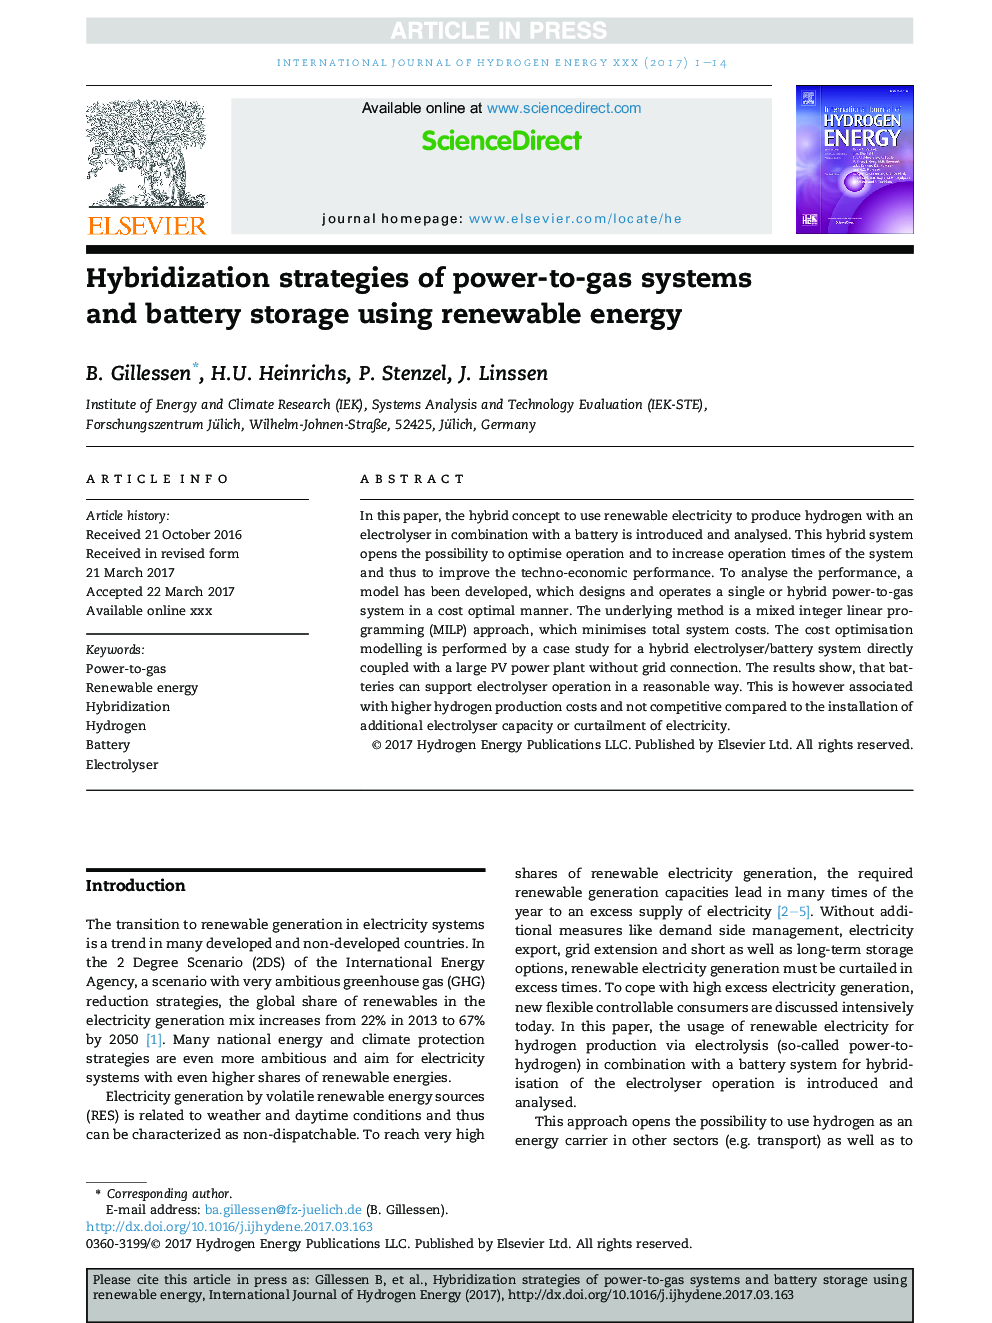 Hybridization strategies of power-to-gas systems and battery storage using renewable energy